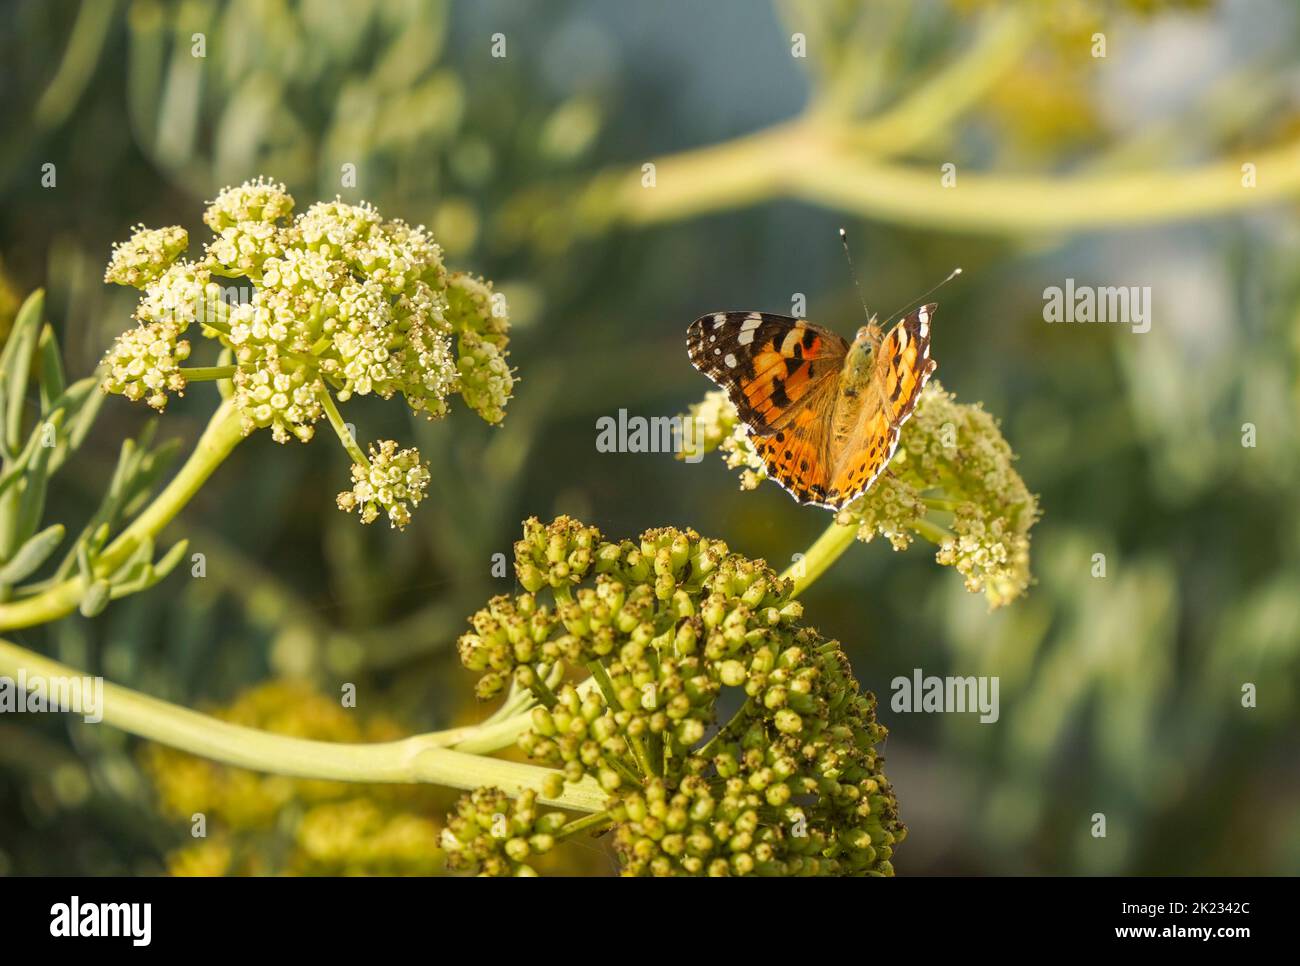 Painted lady, butterfly, vanesa cardui, on rock samphire, Andalusia, Spain, Stock Photo